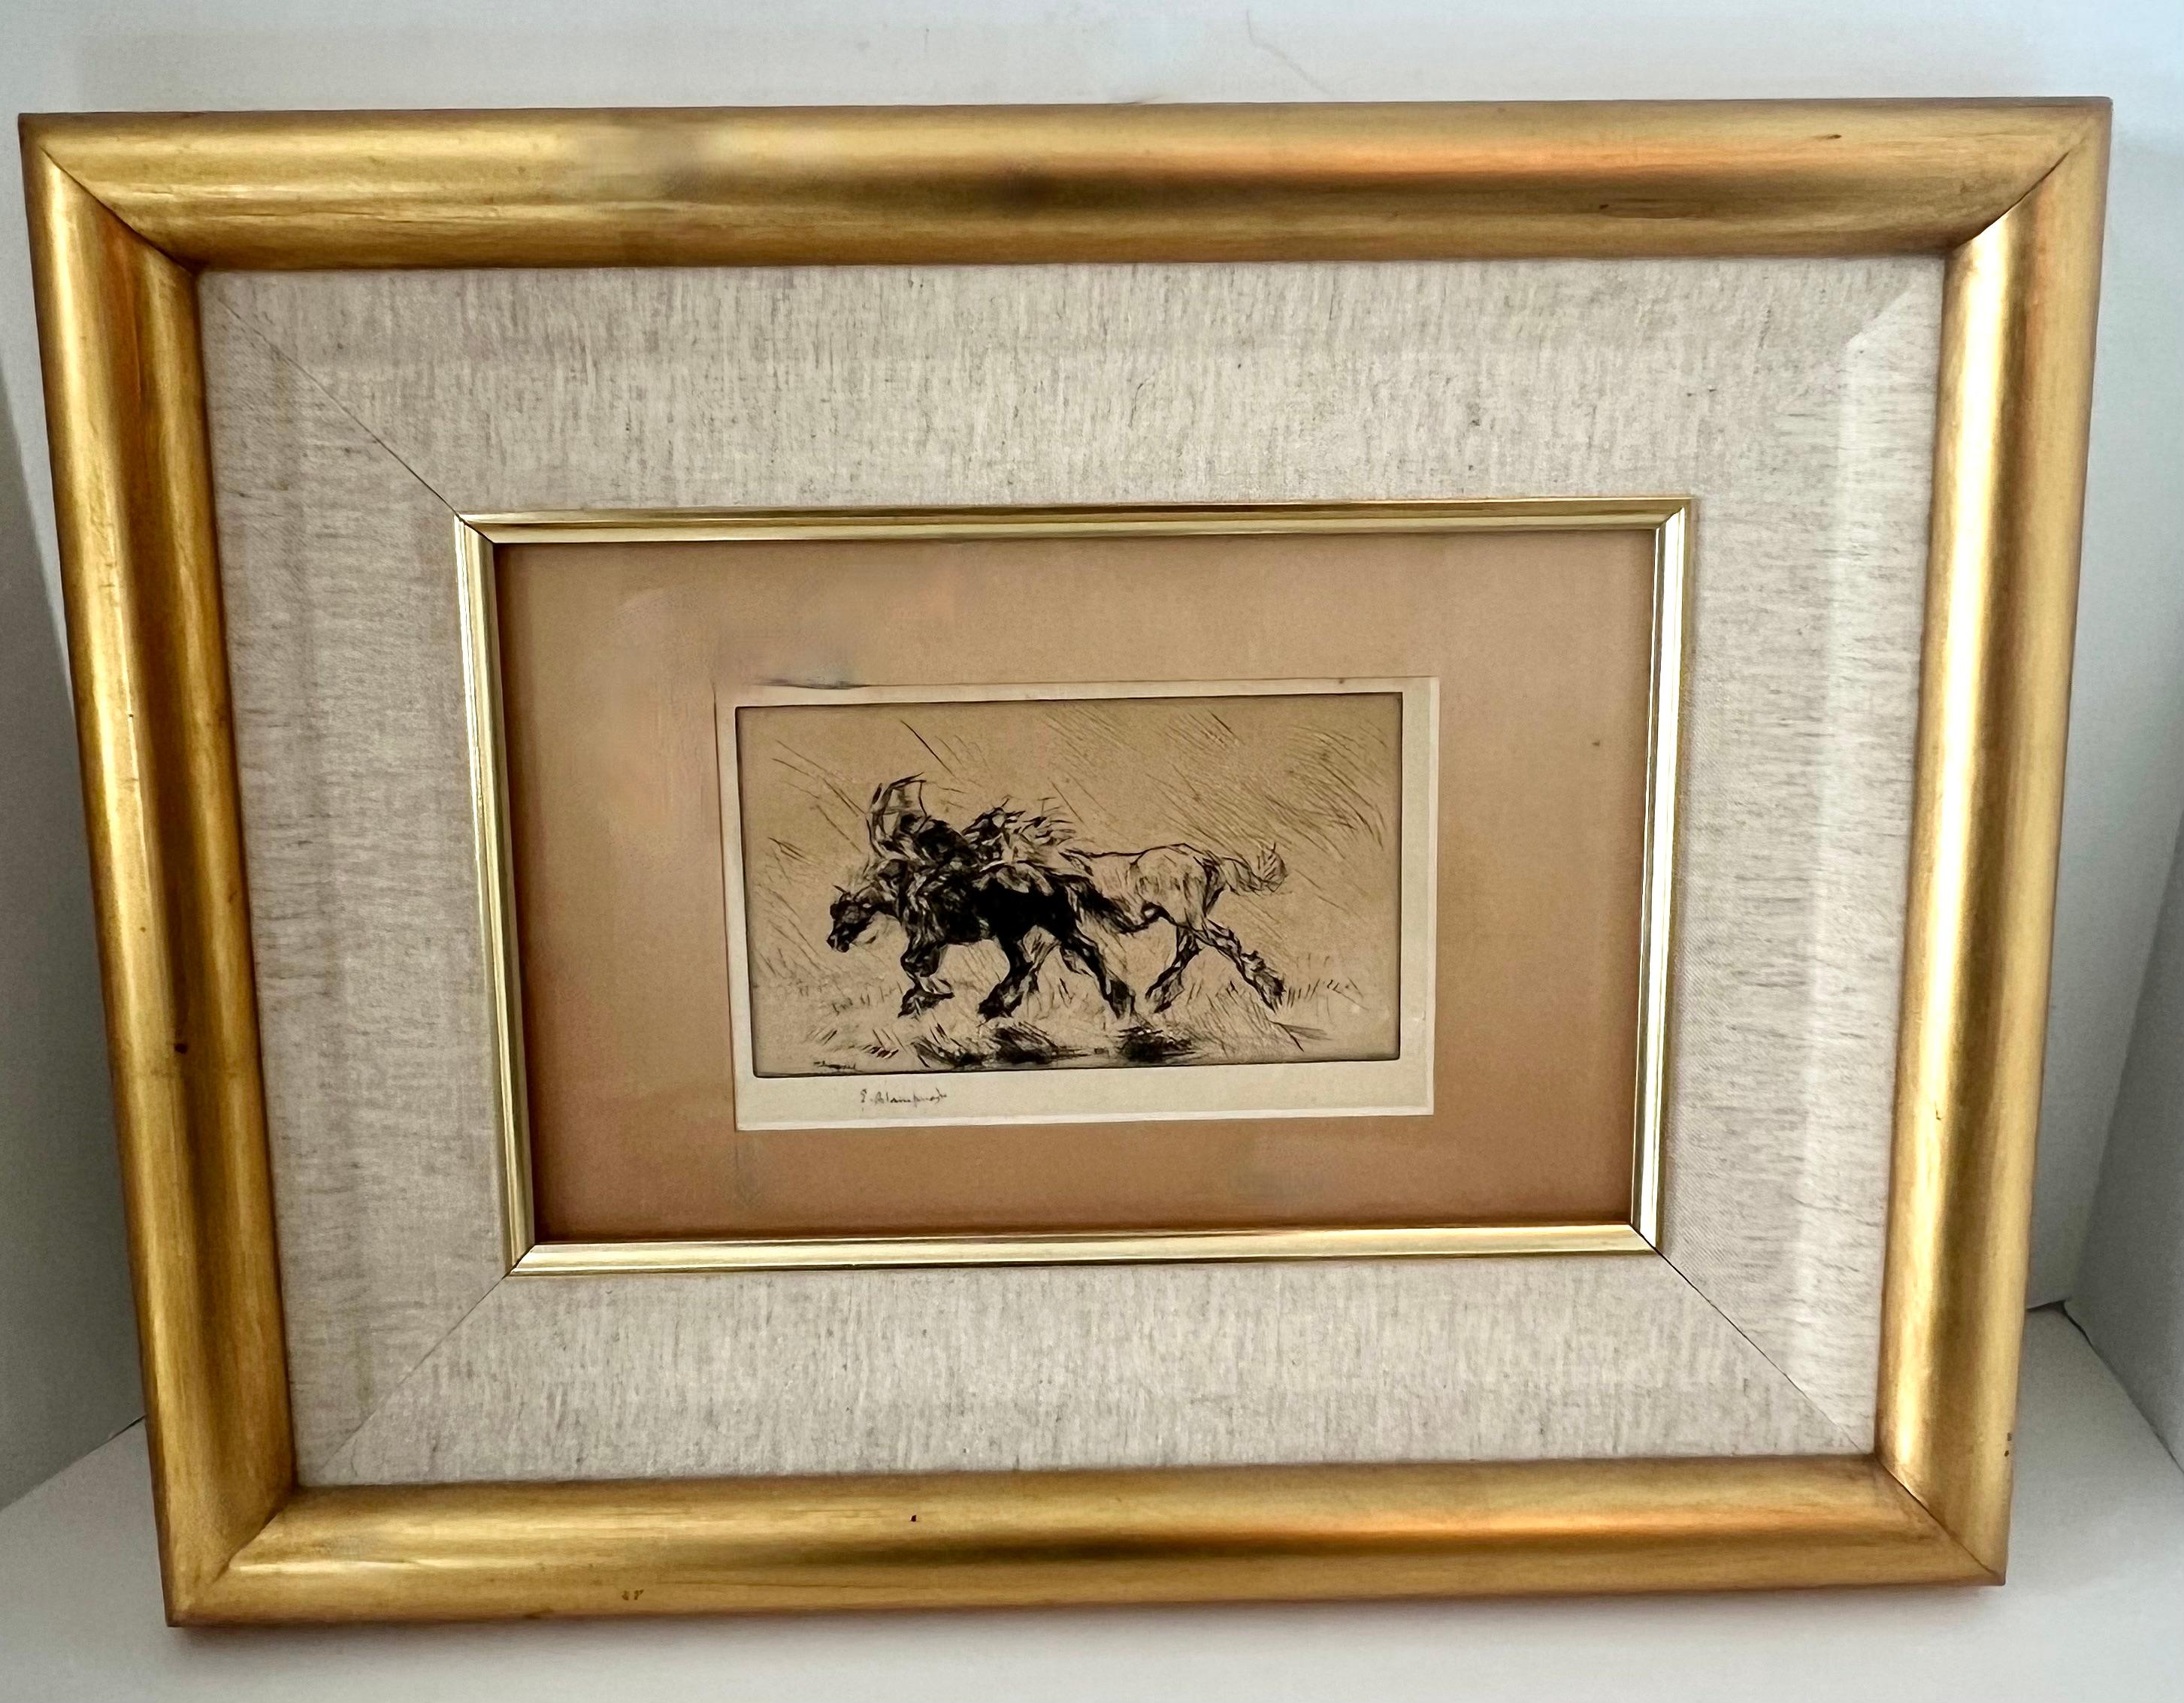  	Edmund Blampied Pen Drawing of a Horse Matted and Framed in Gilt Frame For Sale 4